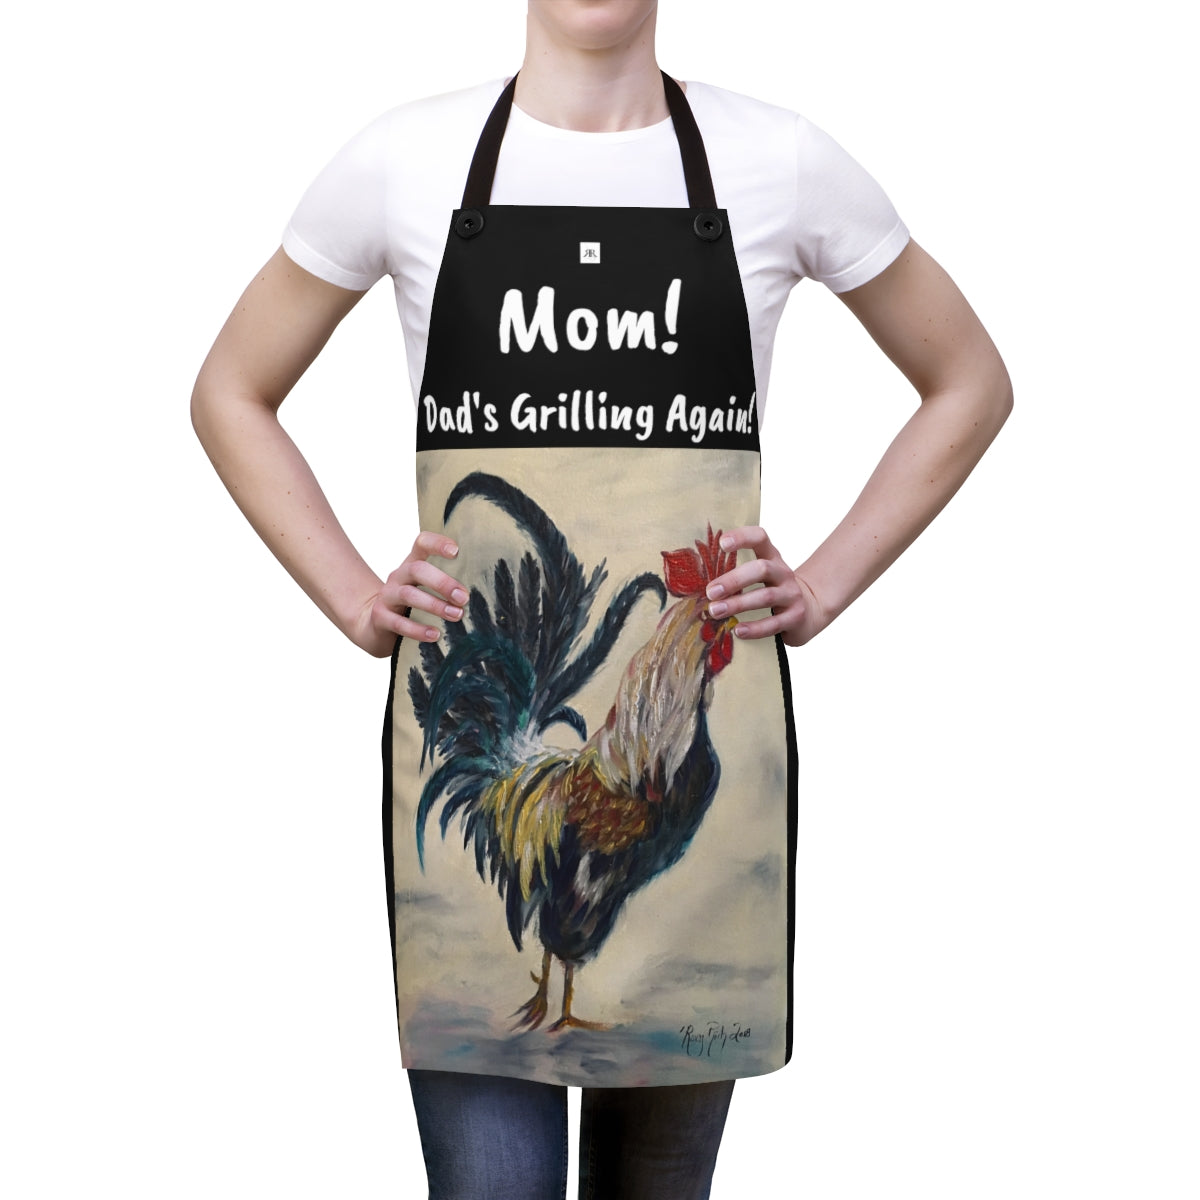 Mom!  Dad's Grilling Again!  saying with Original Rooster Painting  Boss Printed on a black cooking Apron Fathers Day Gift